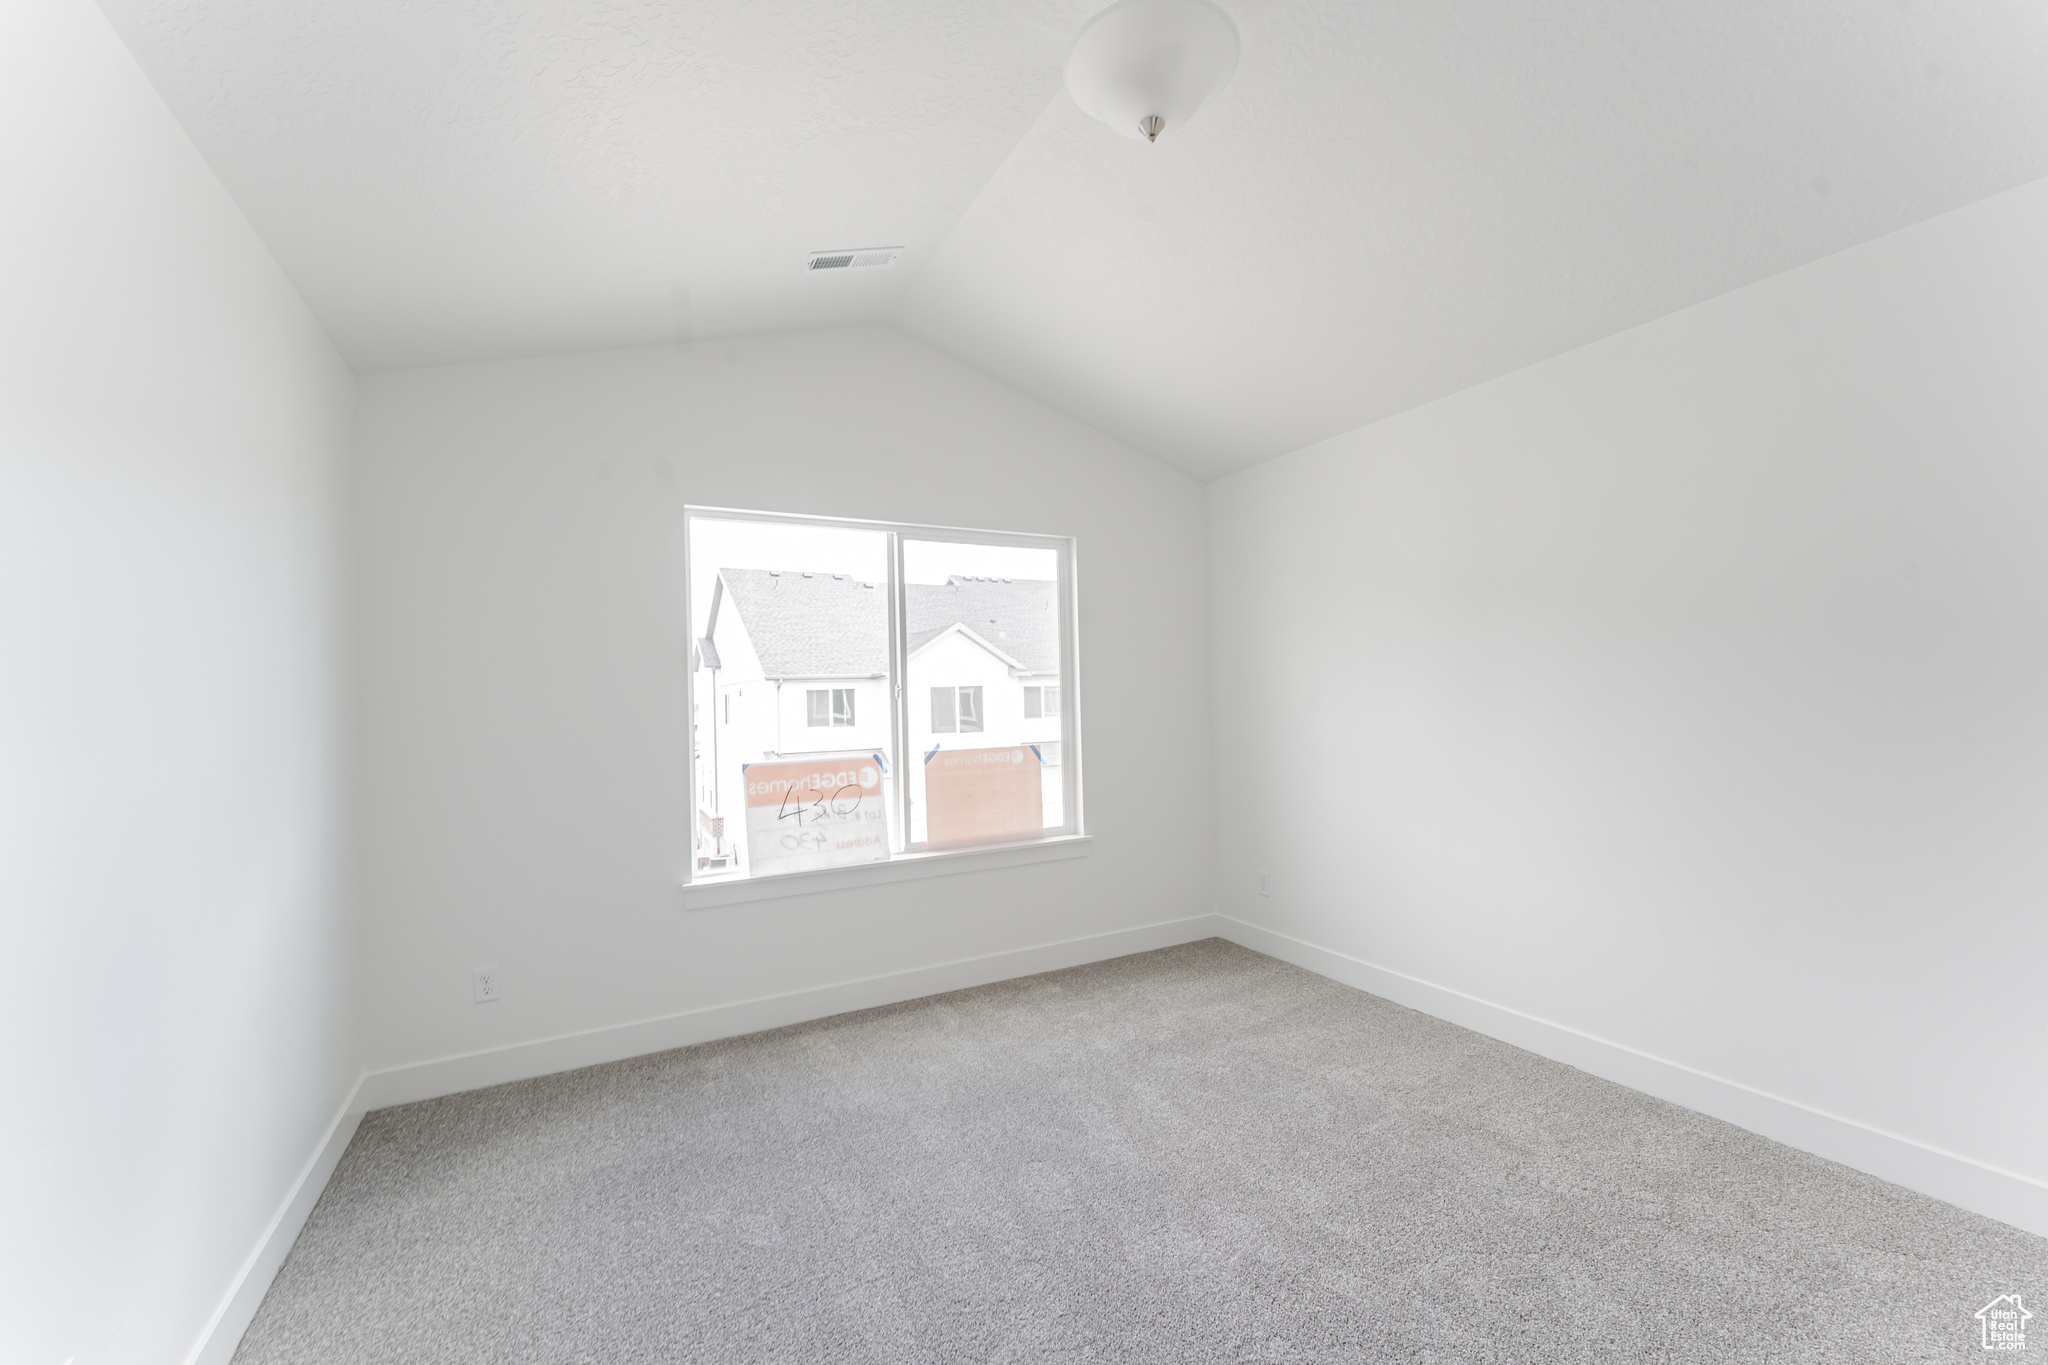 Spare room with lofted ceiling and carpet flooring